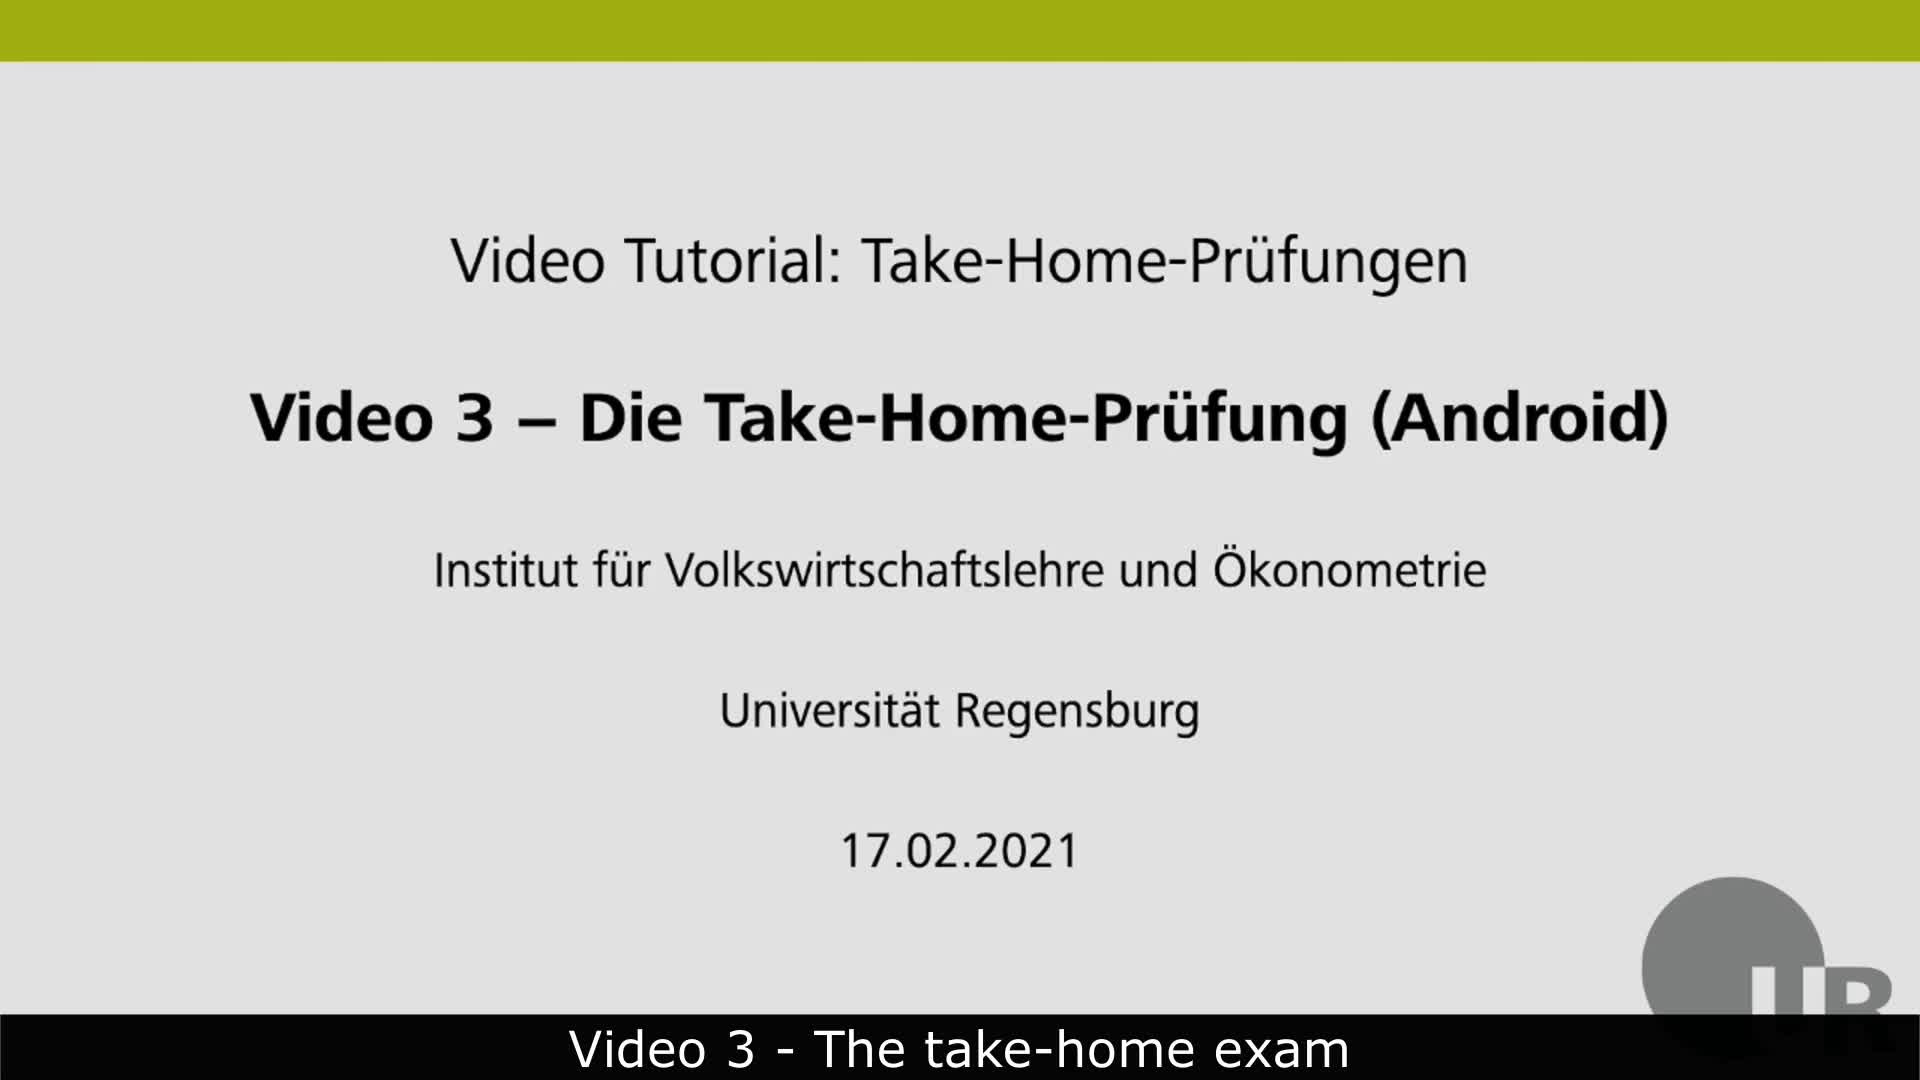 Video 3 - The Take-Home-Exam (Android, English subtitles)